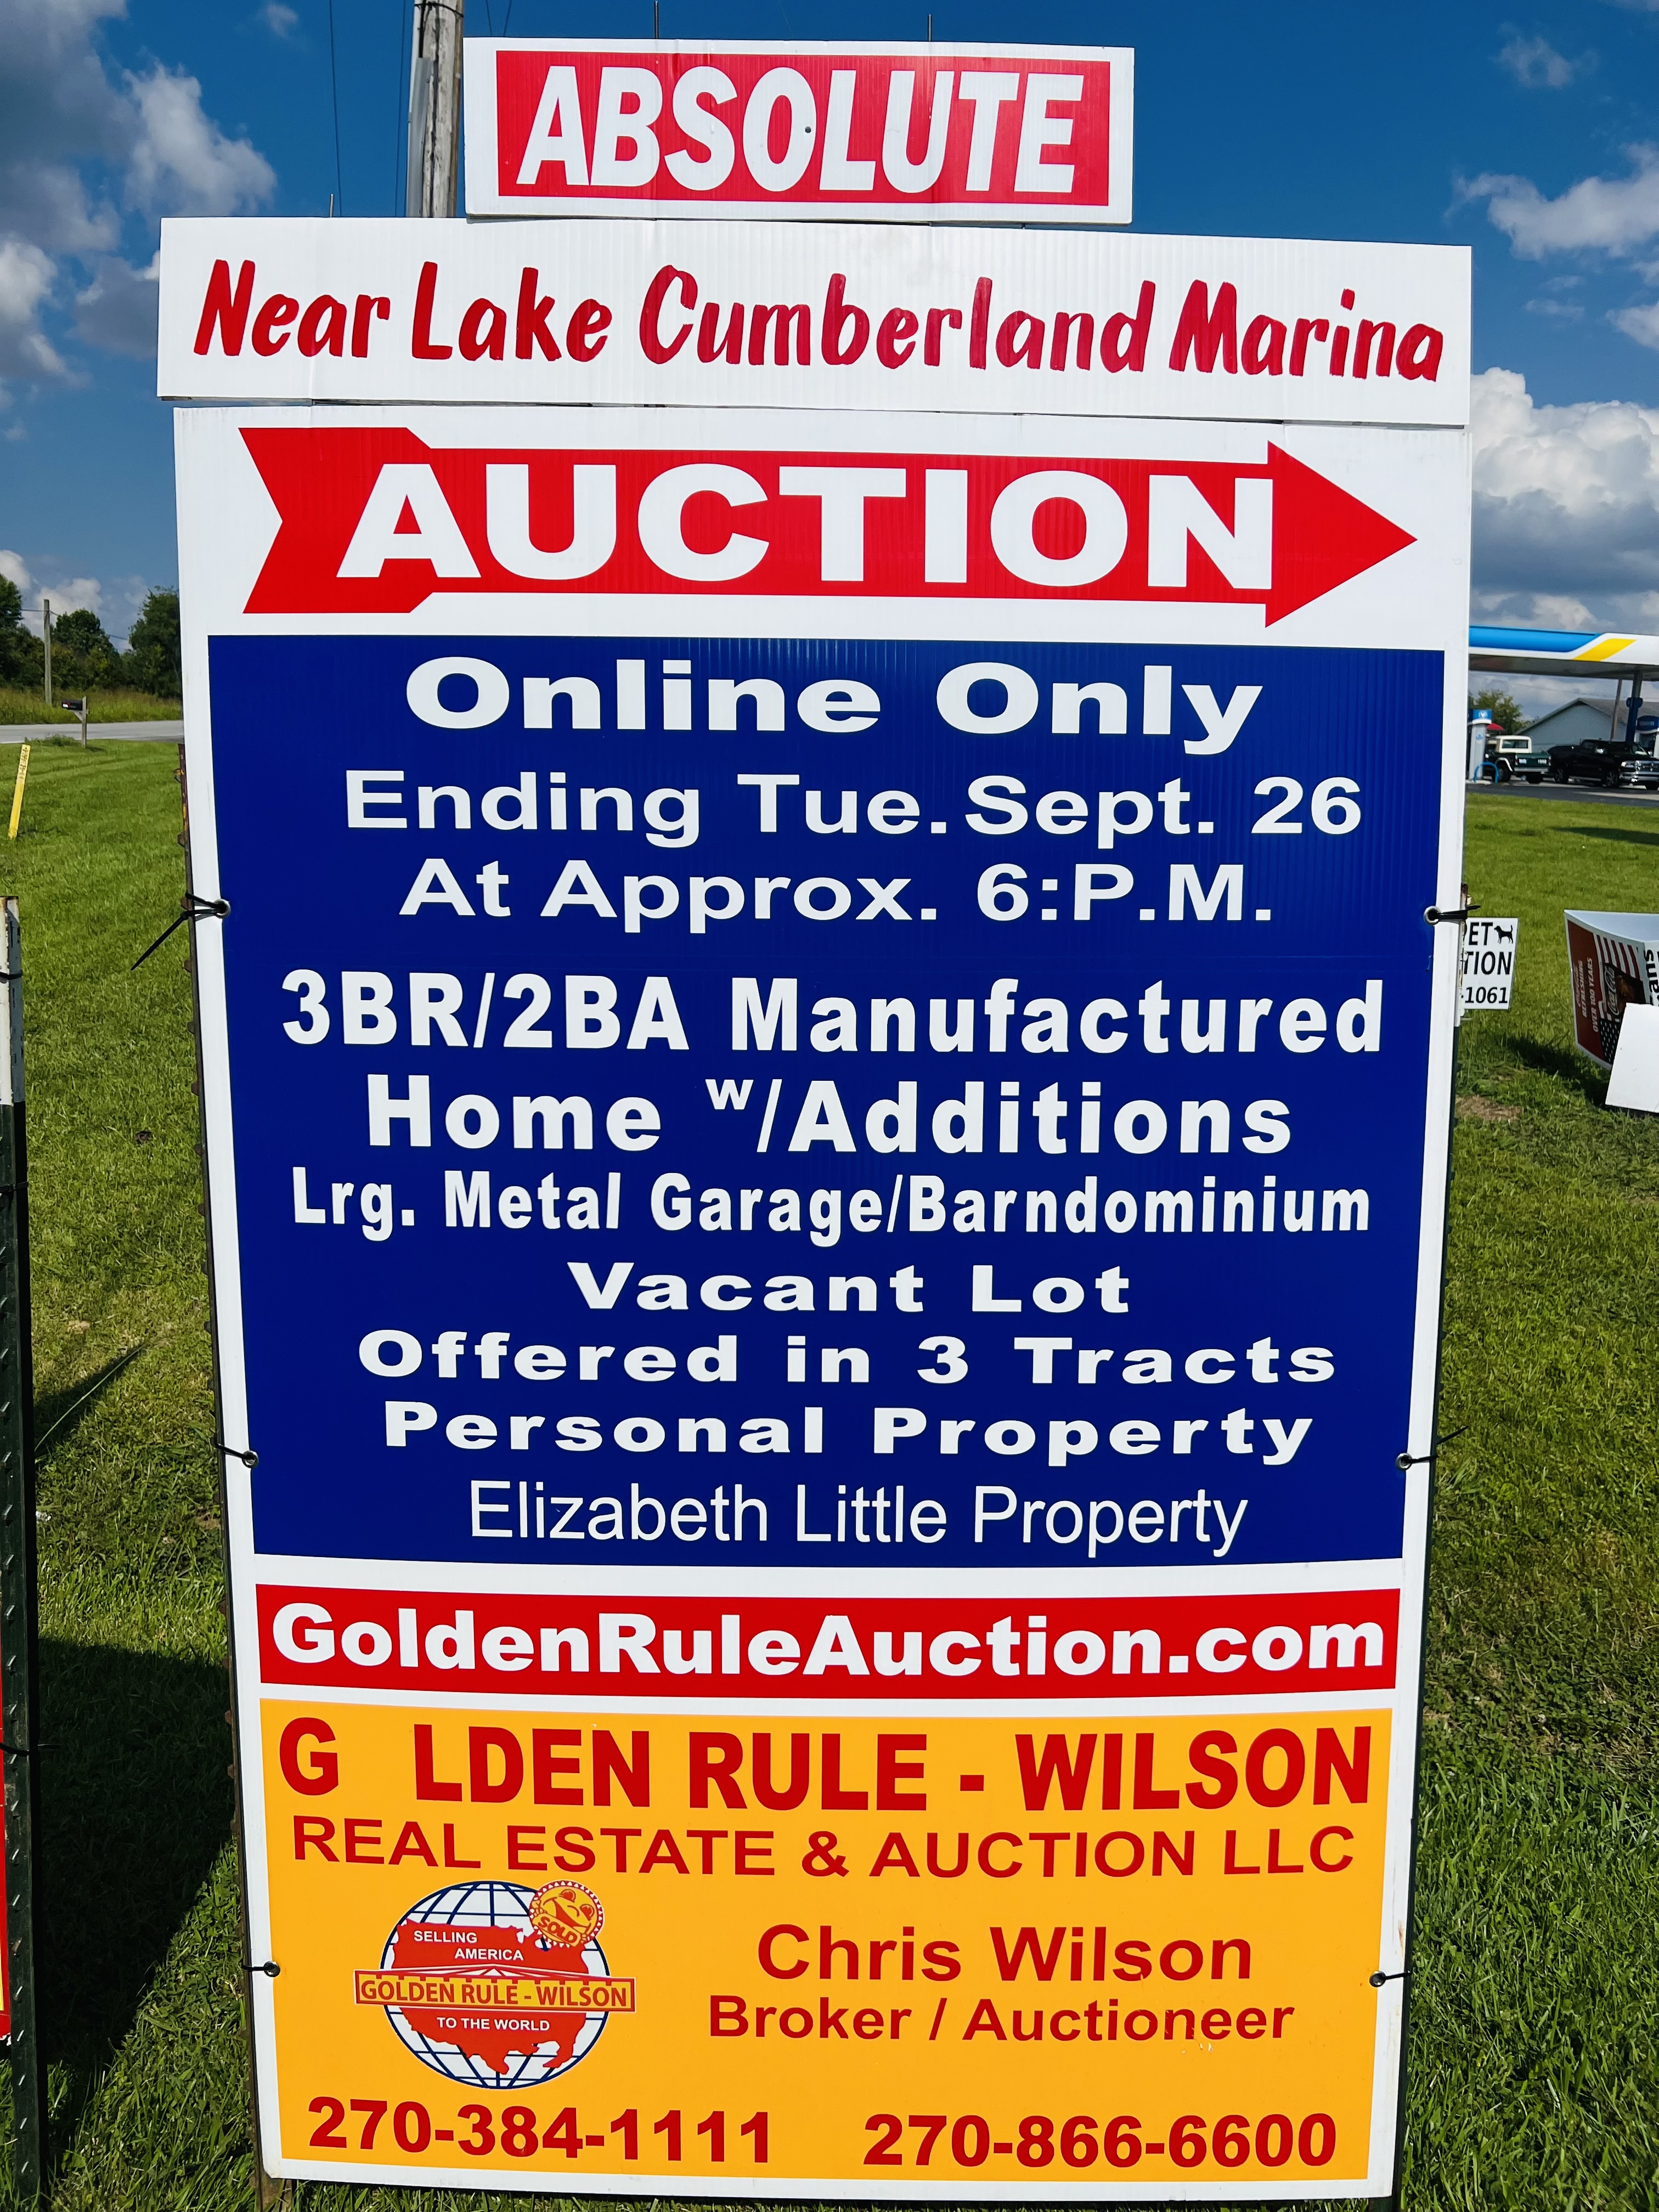 AUCTION BEGINS 9/13/23 and ENDS 9/26/23.  See terms online at www.GoldenRuleAuction.com